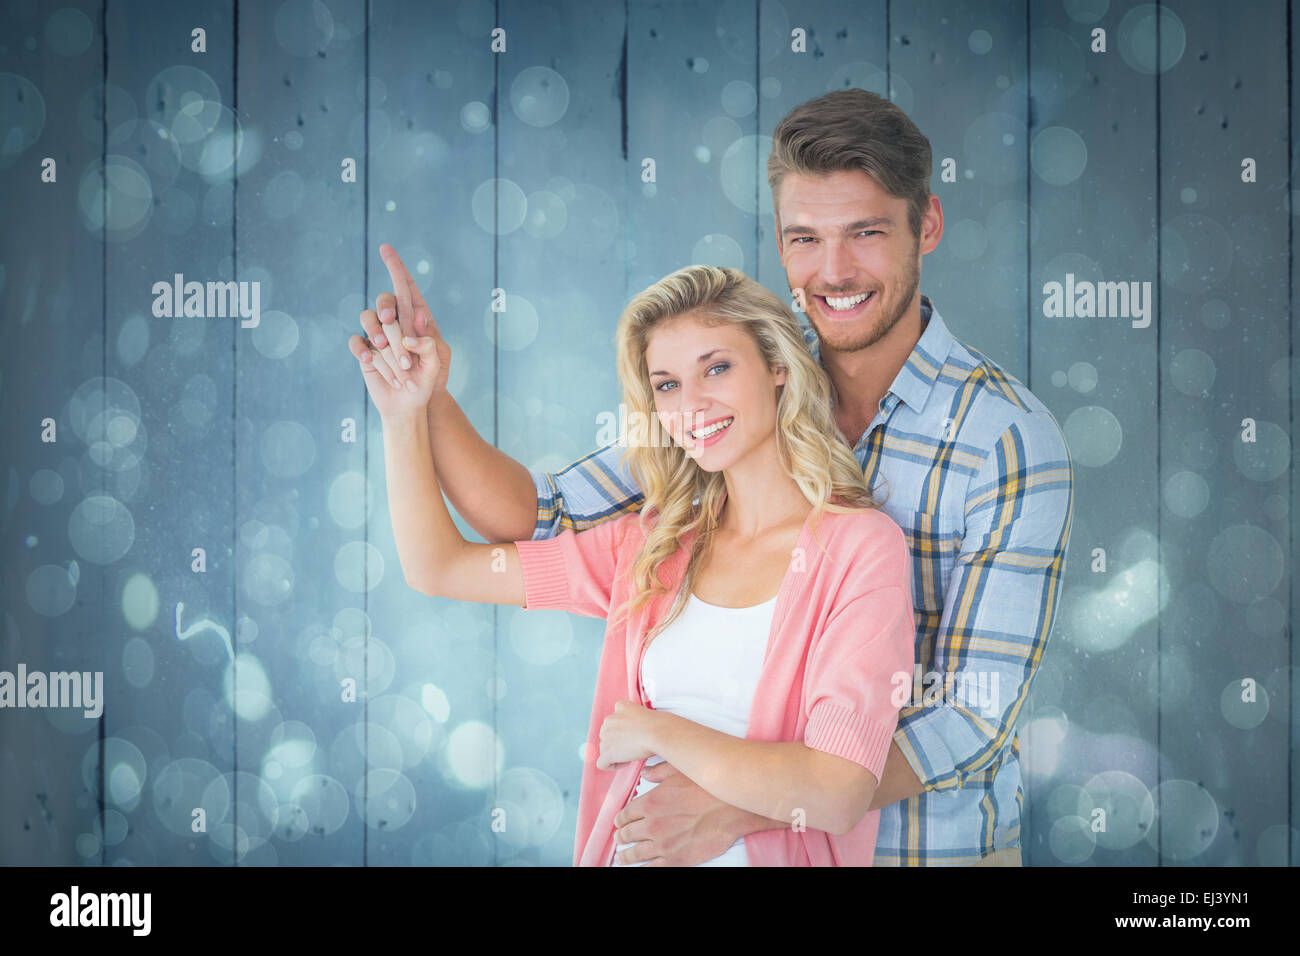 Composite image of attractive young couple embracing and pointing Stock Photo